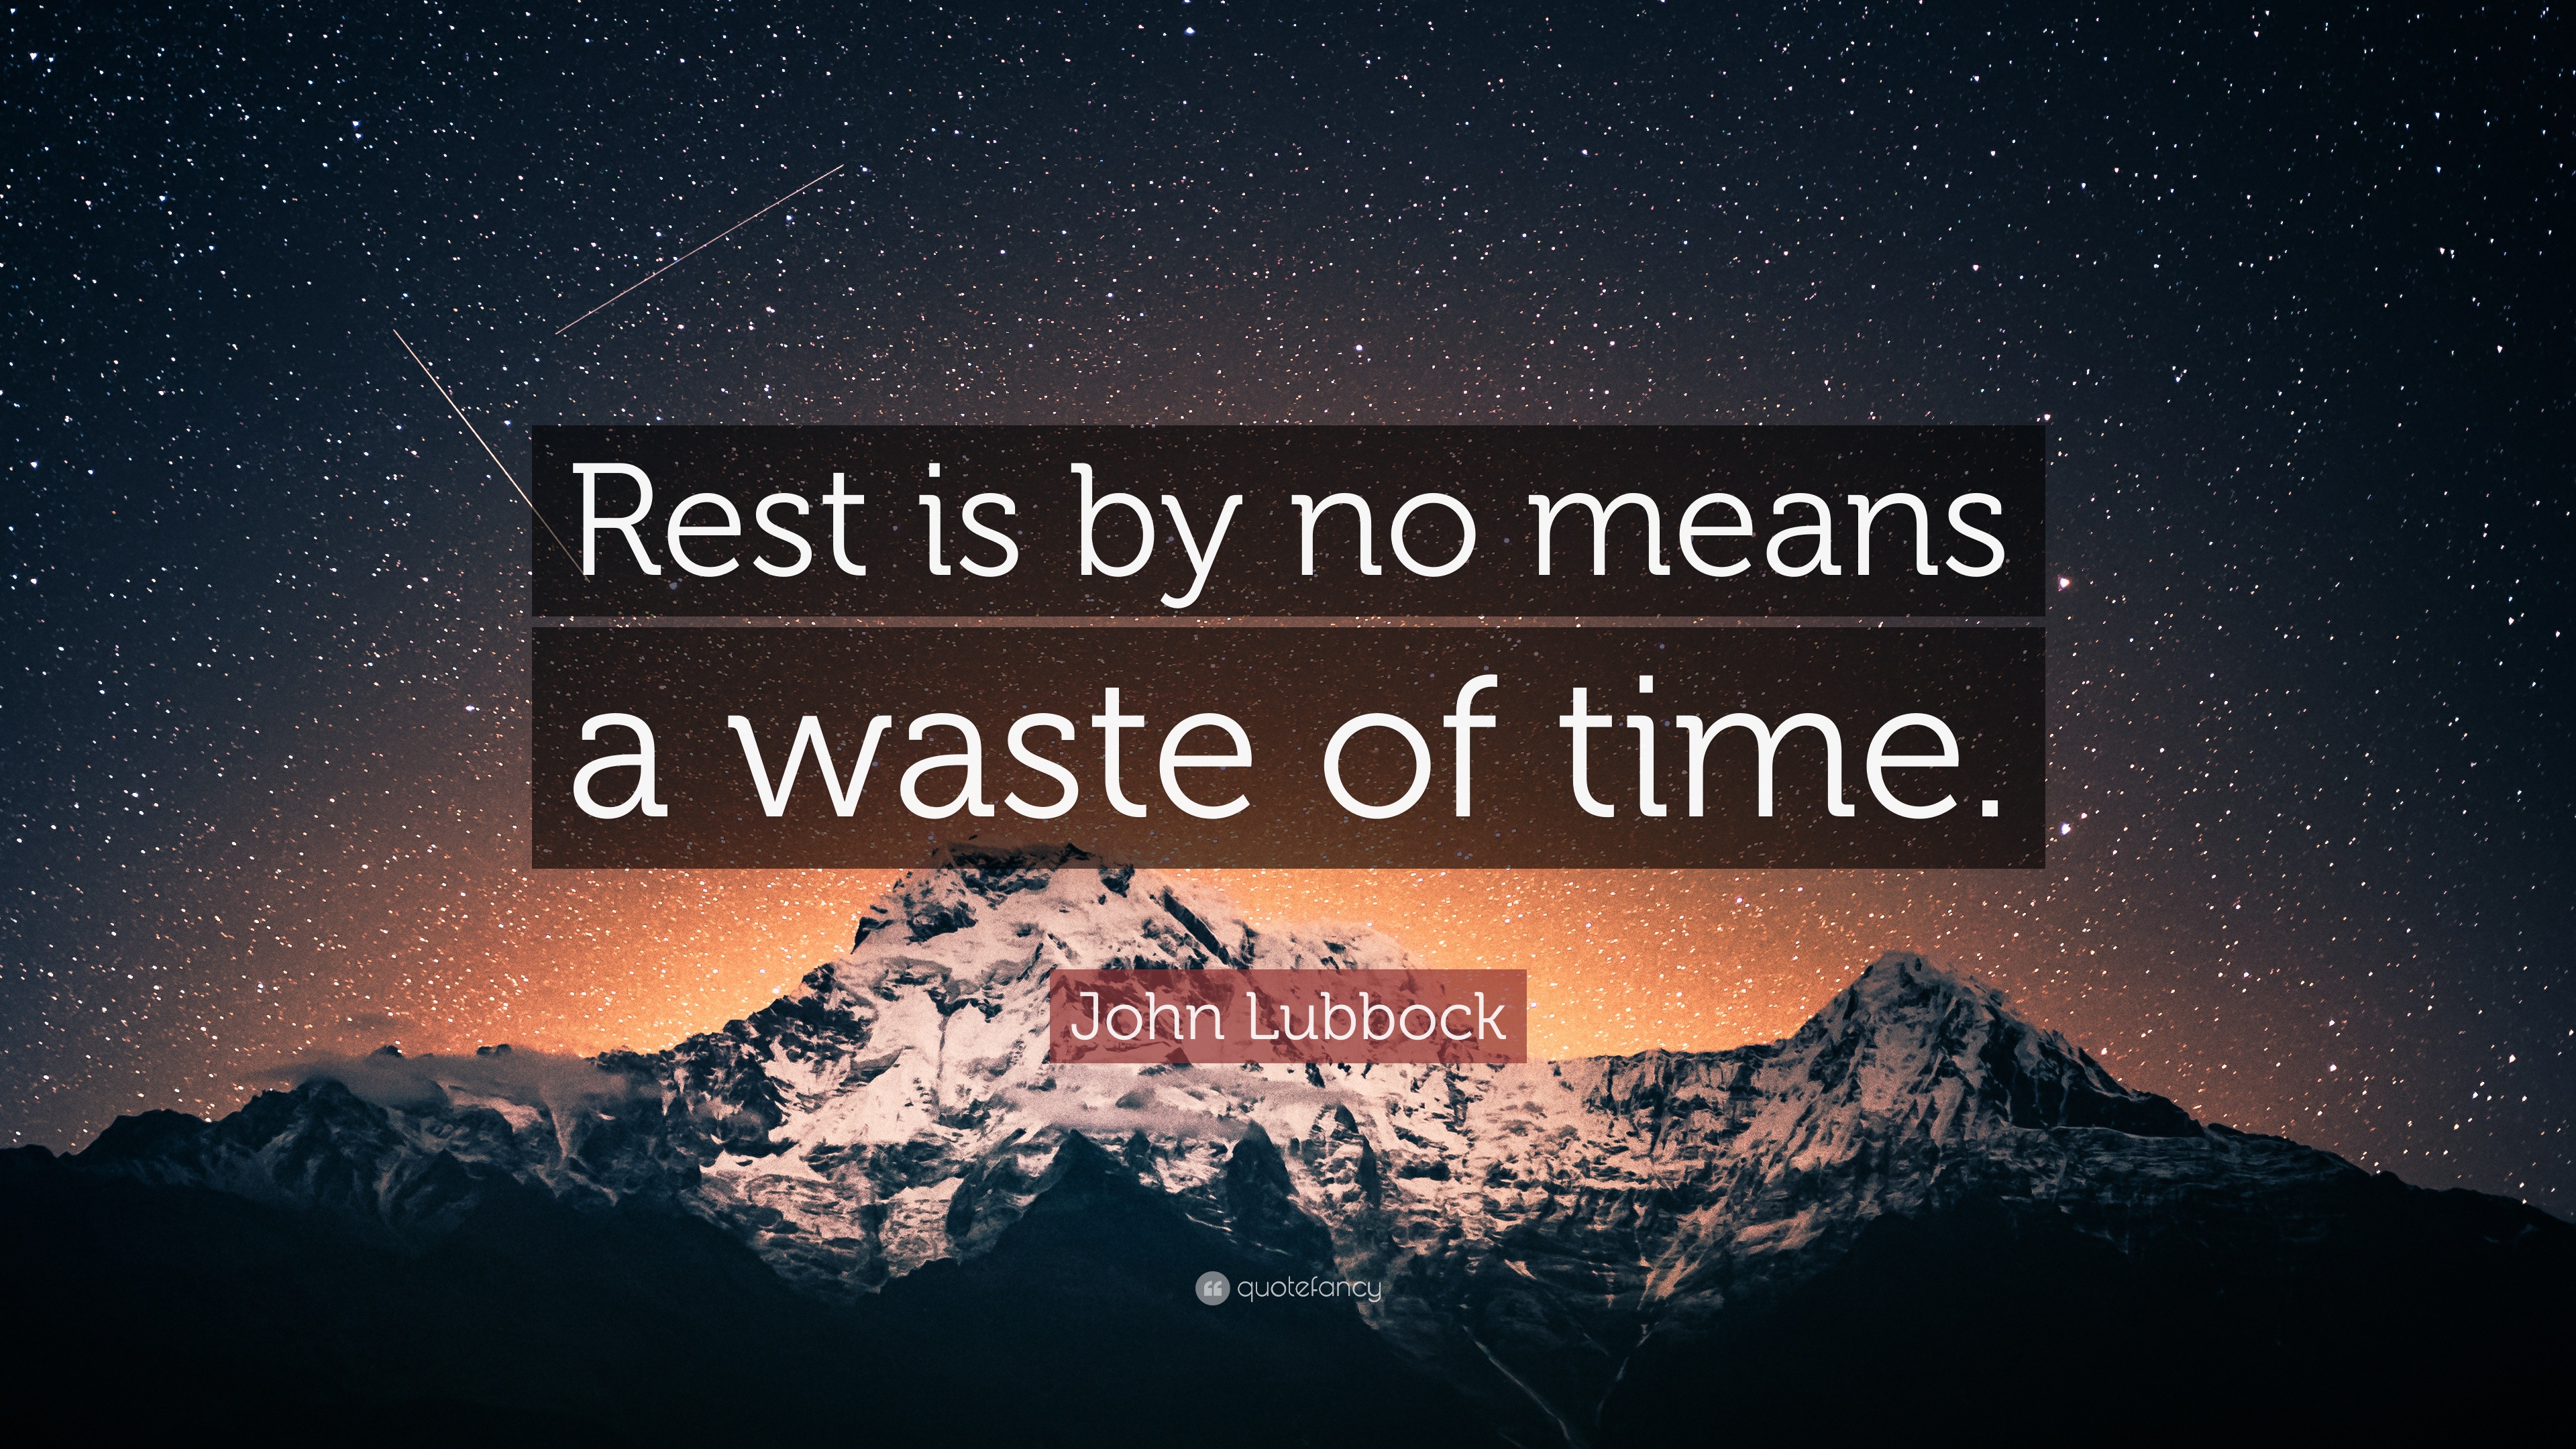 resting is not a waste of time